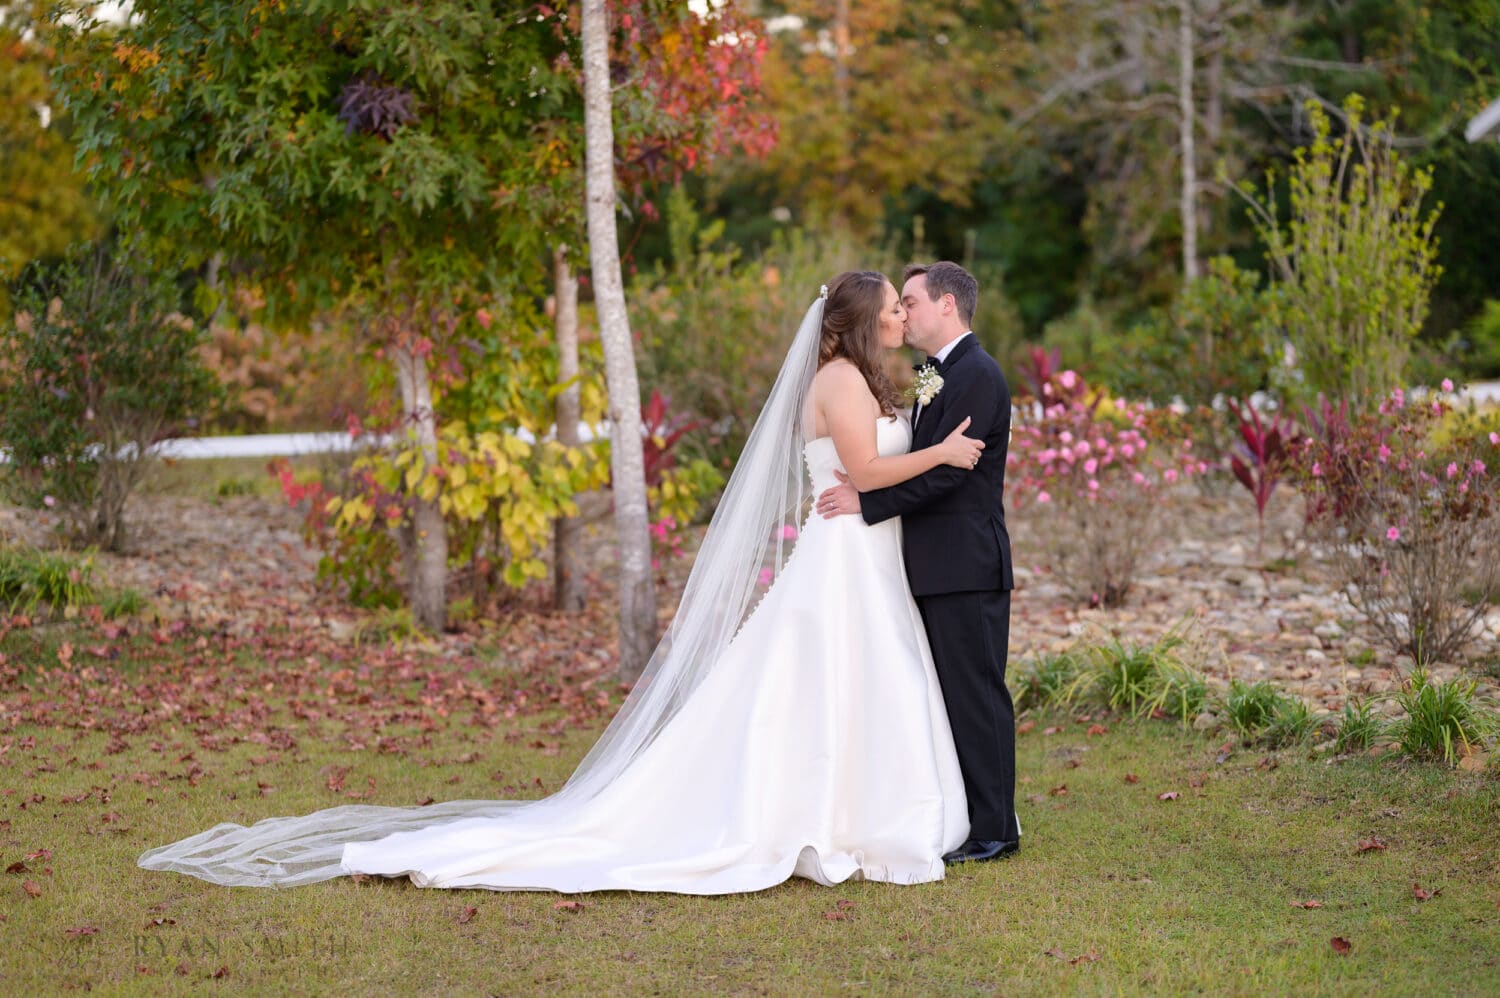 Kiss in front of the garden flowers - The Venue at White Oaks Farm